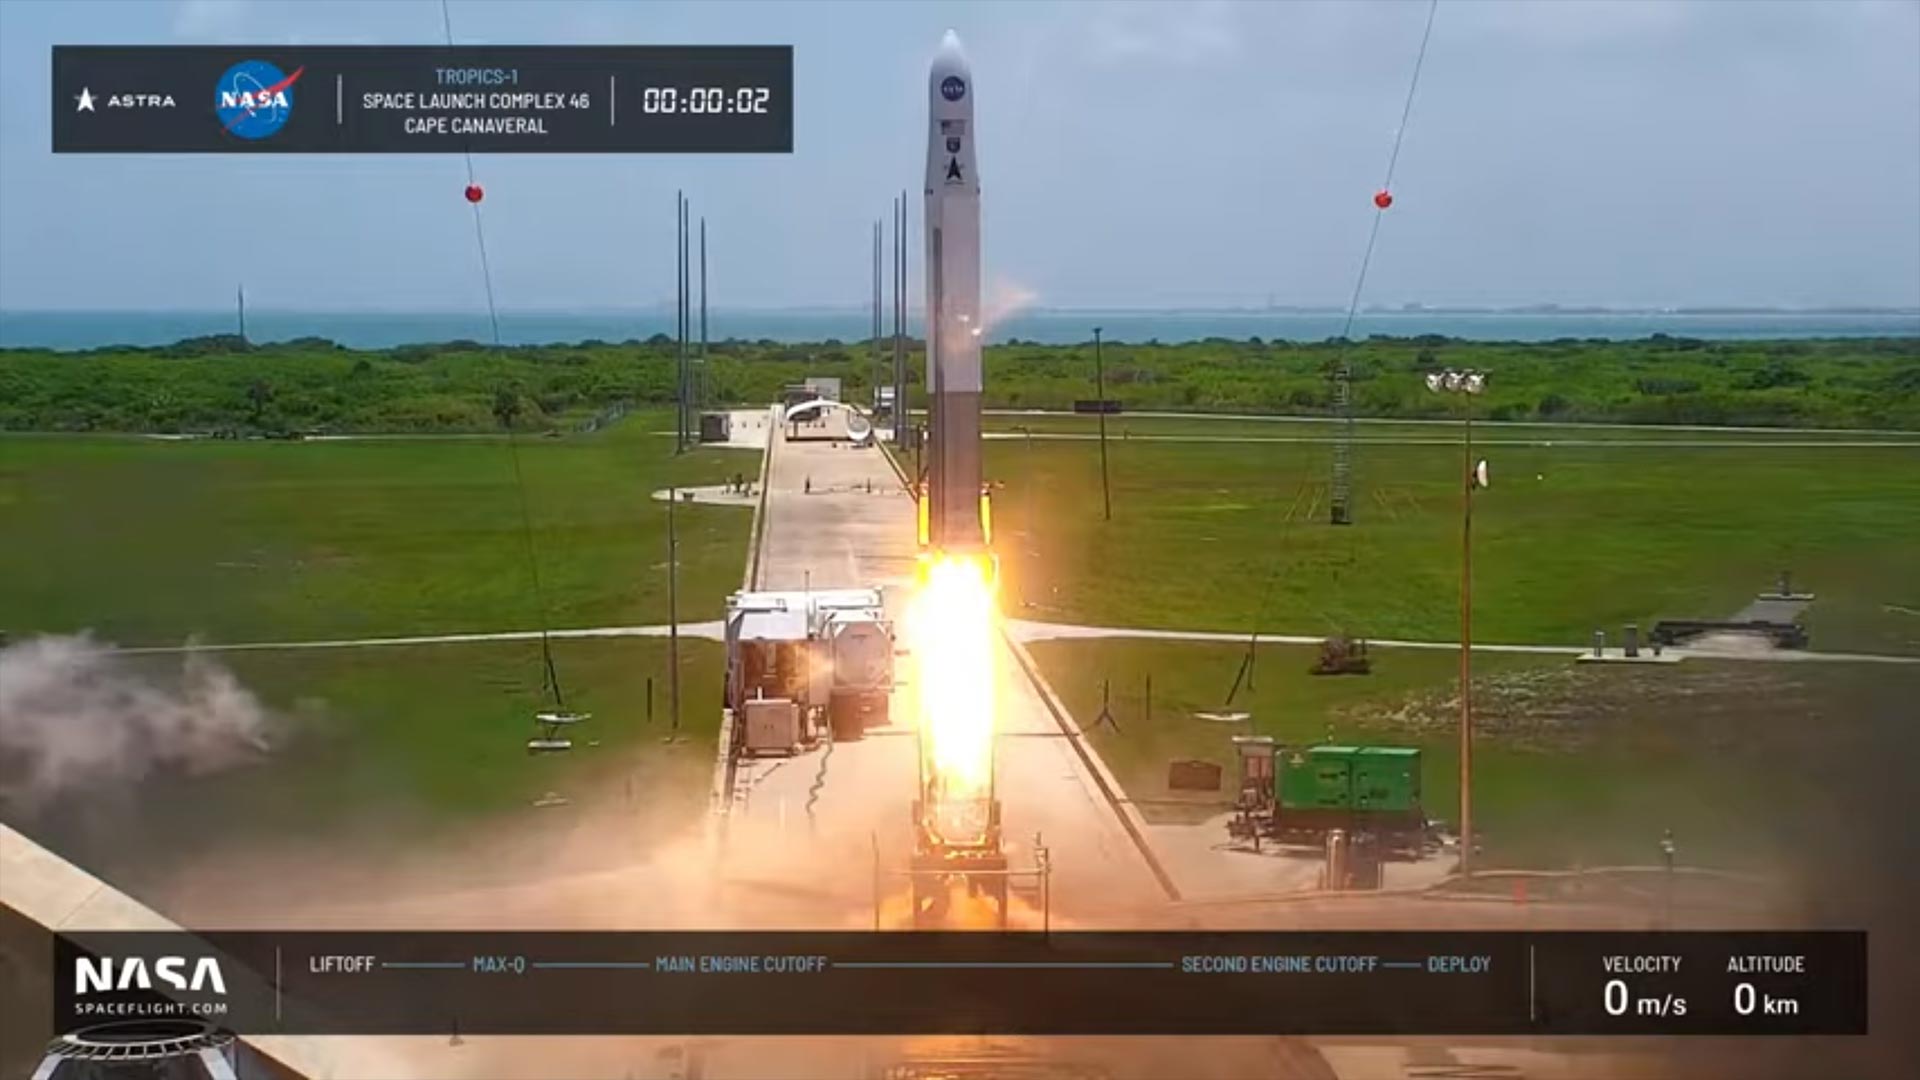 Lift-off of the Astra rocket